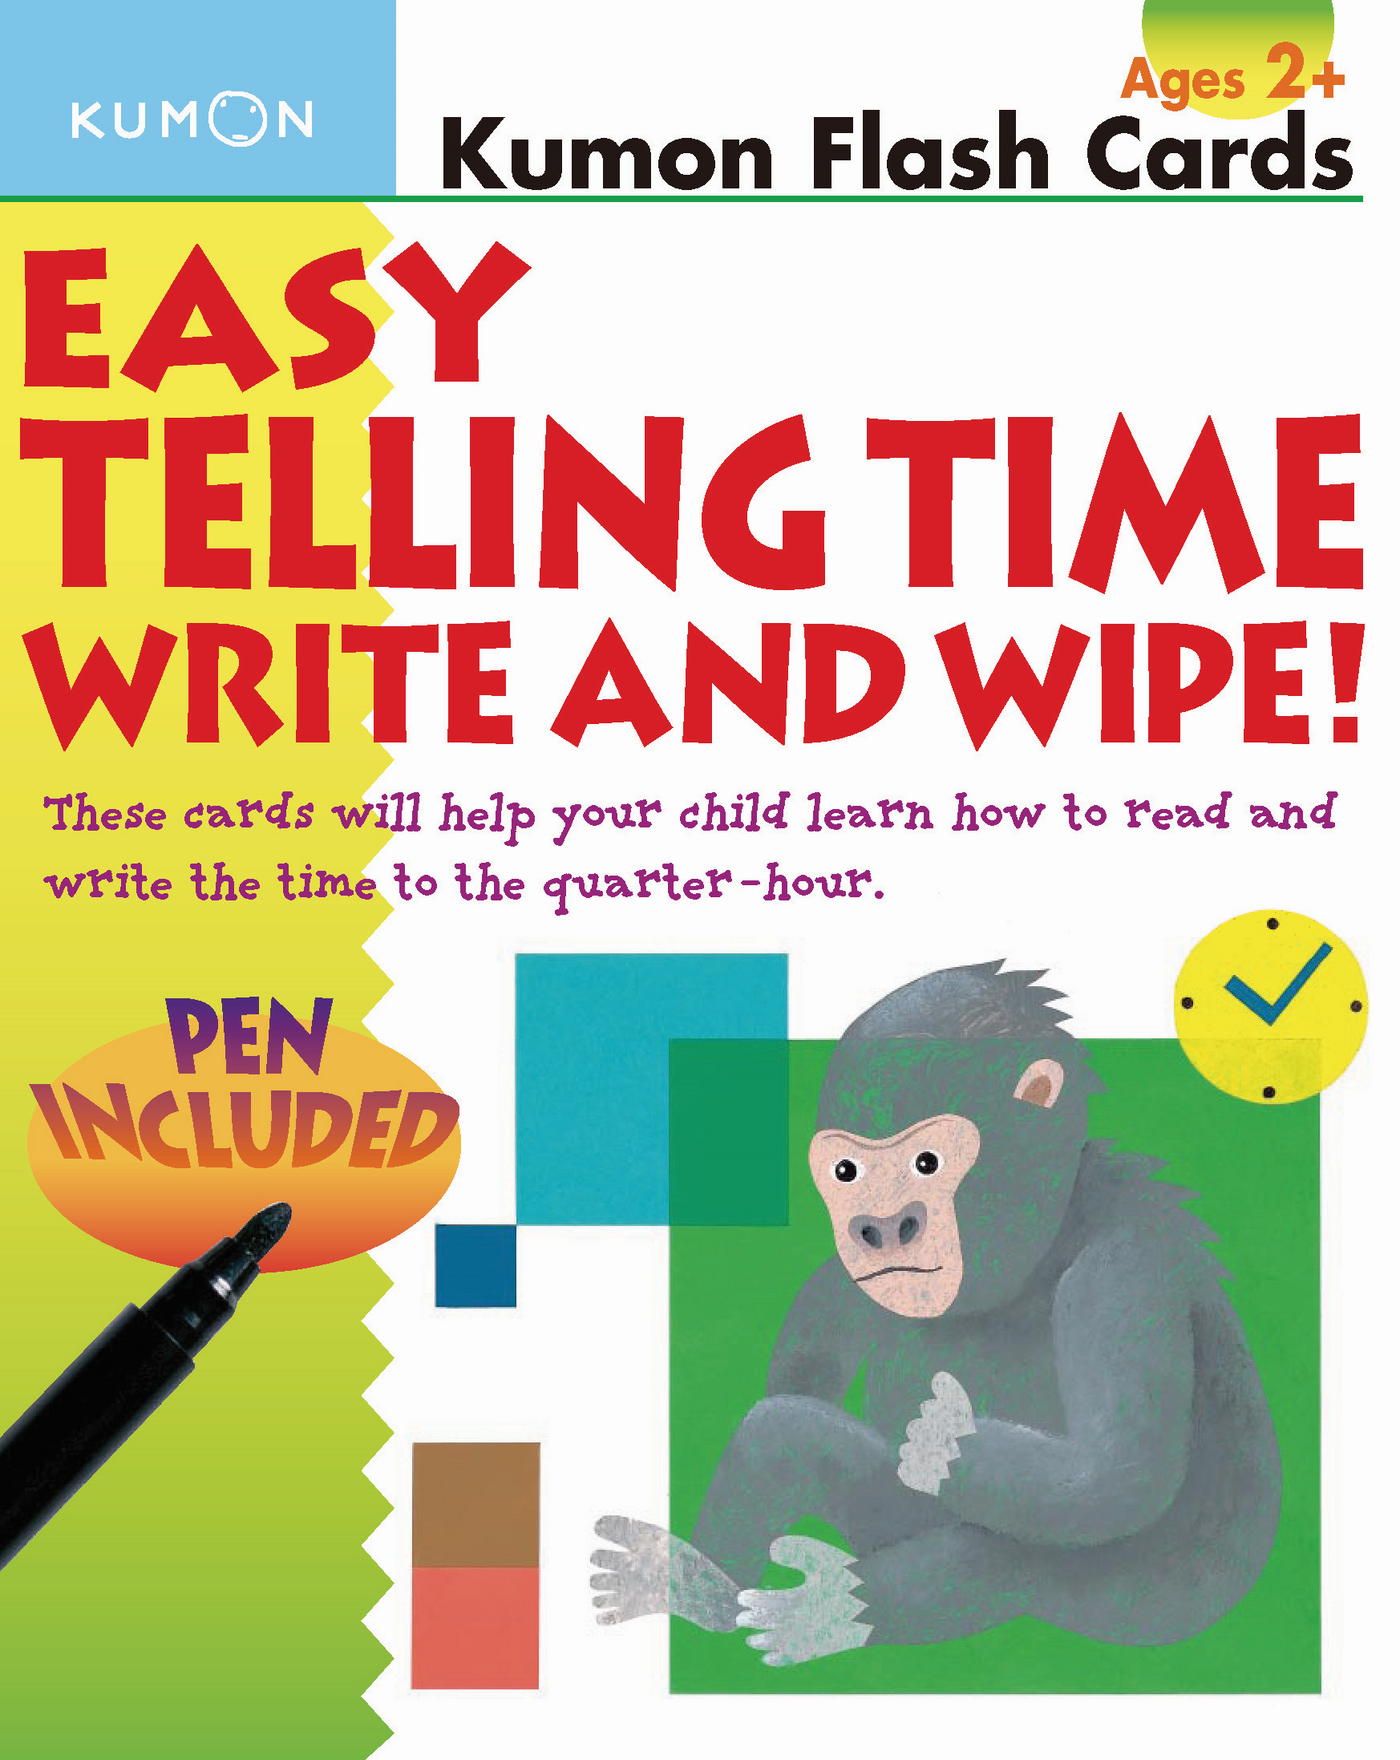 Easy Telling Time: Write and Wipe!